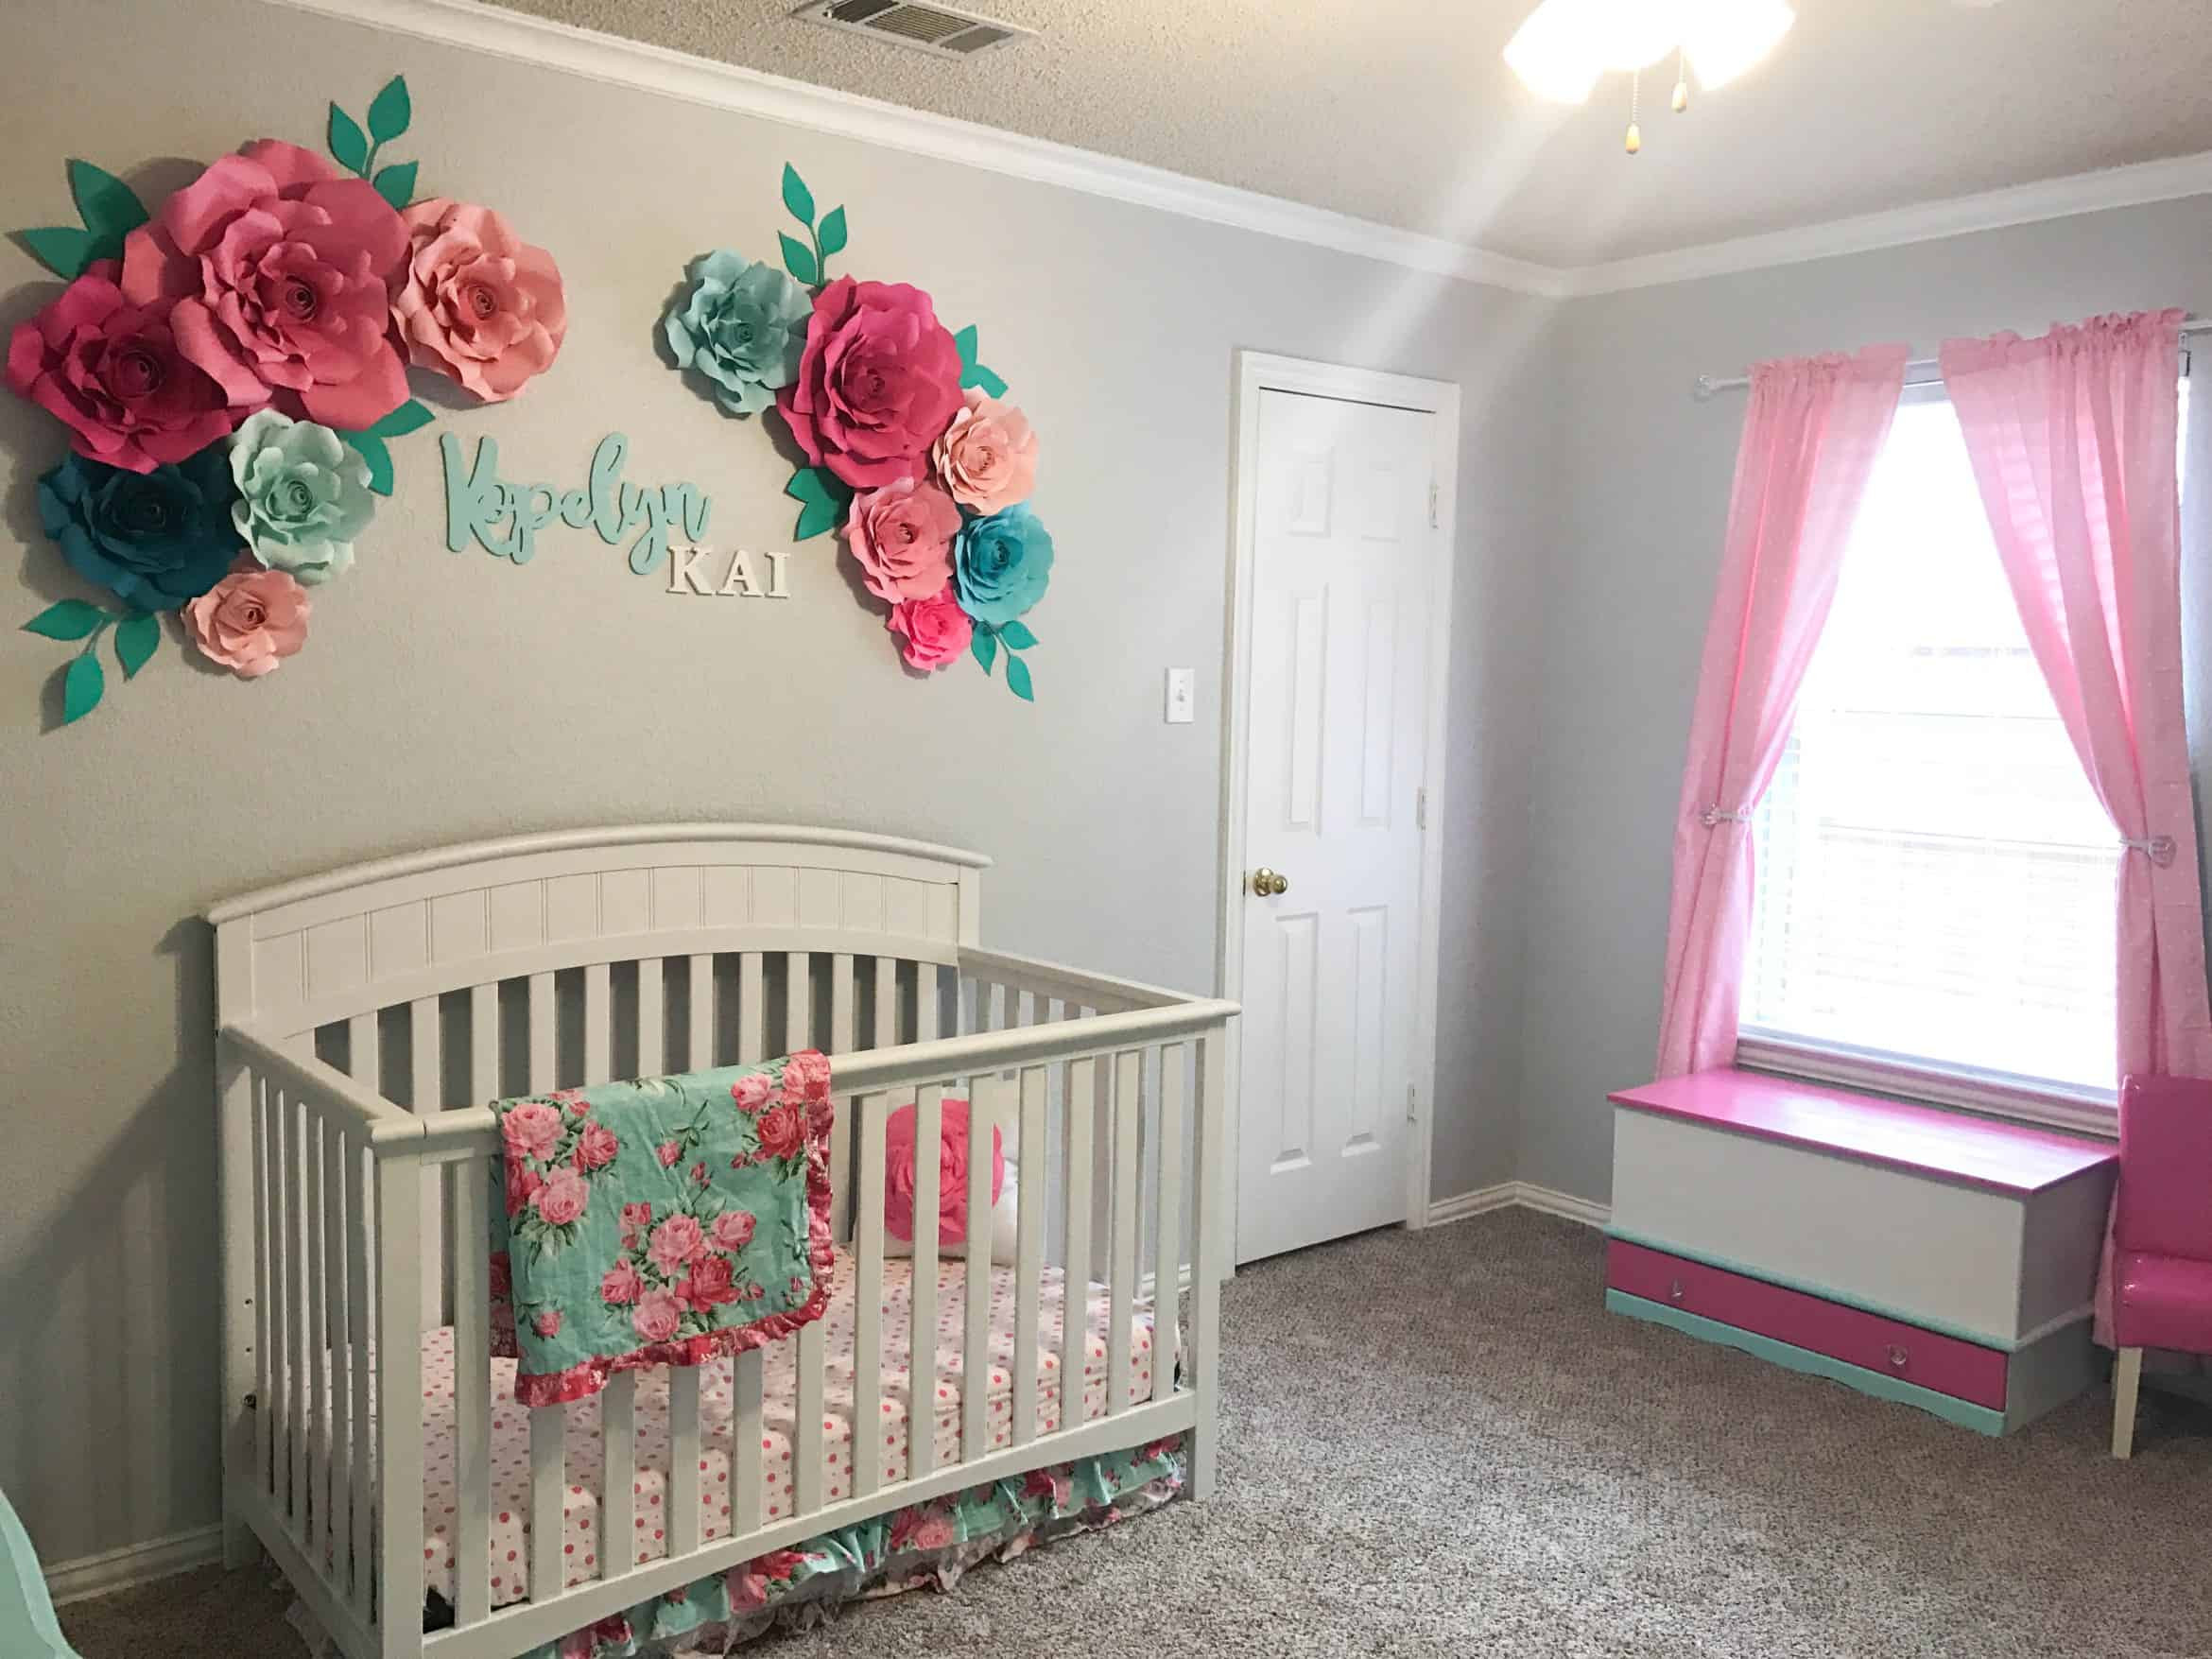 Baby Decor Ideas
 The New Mom s Go To Guide To The Best Nursery Ideas